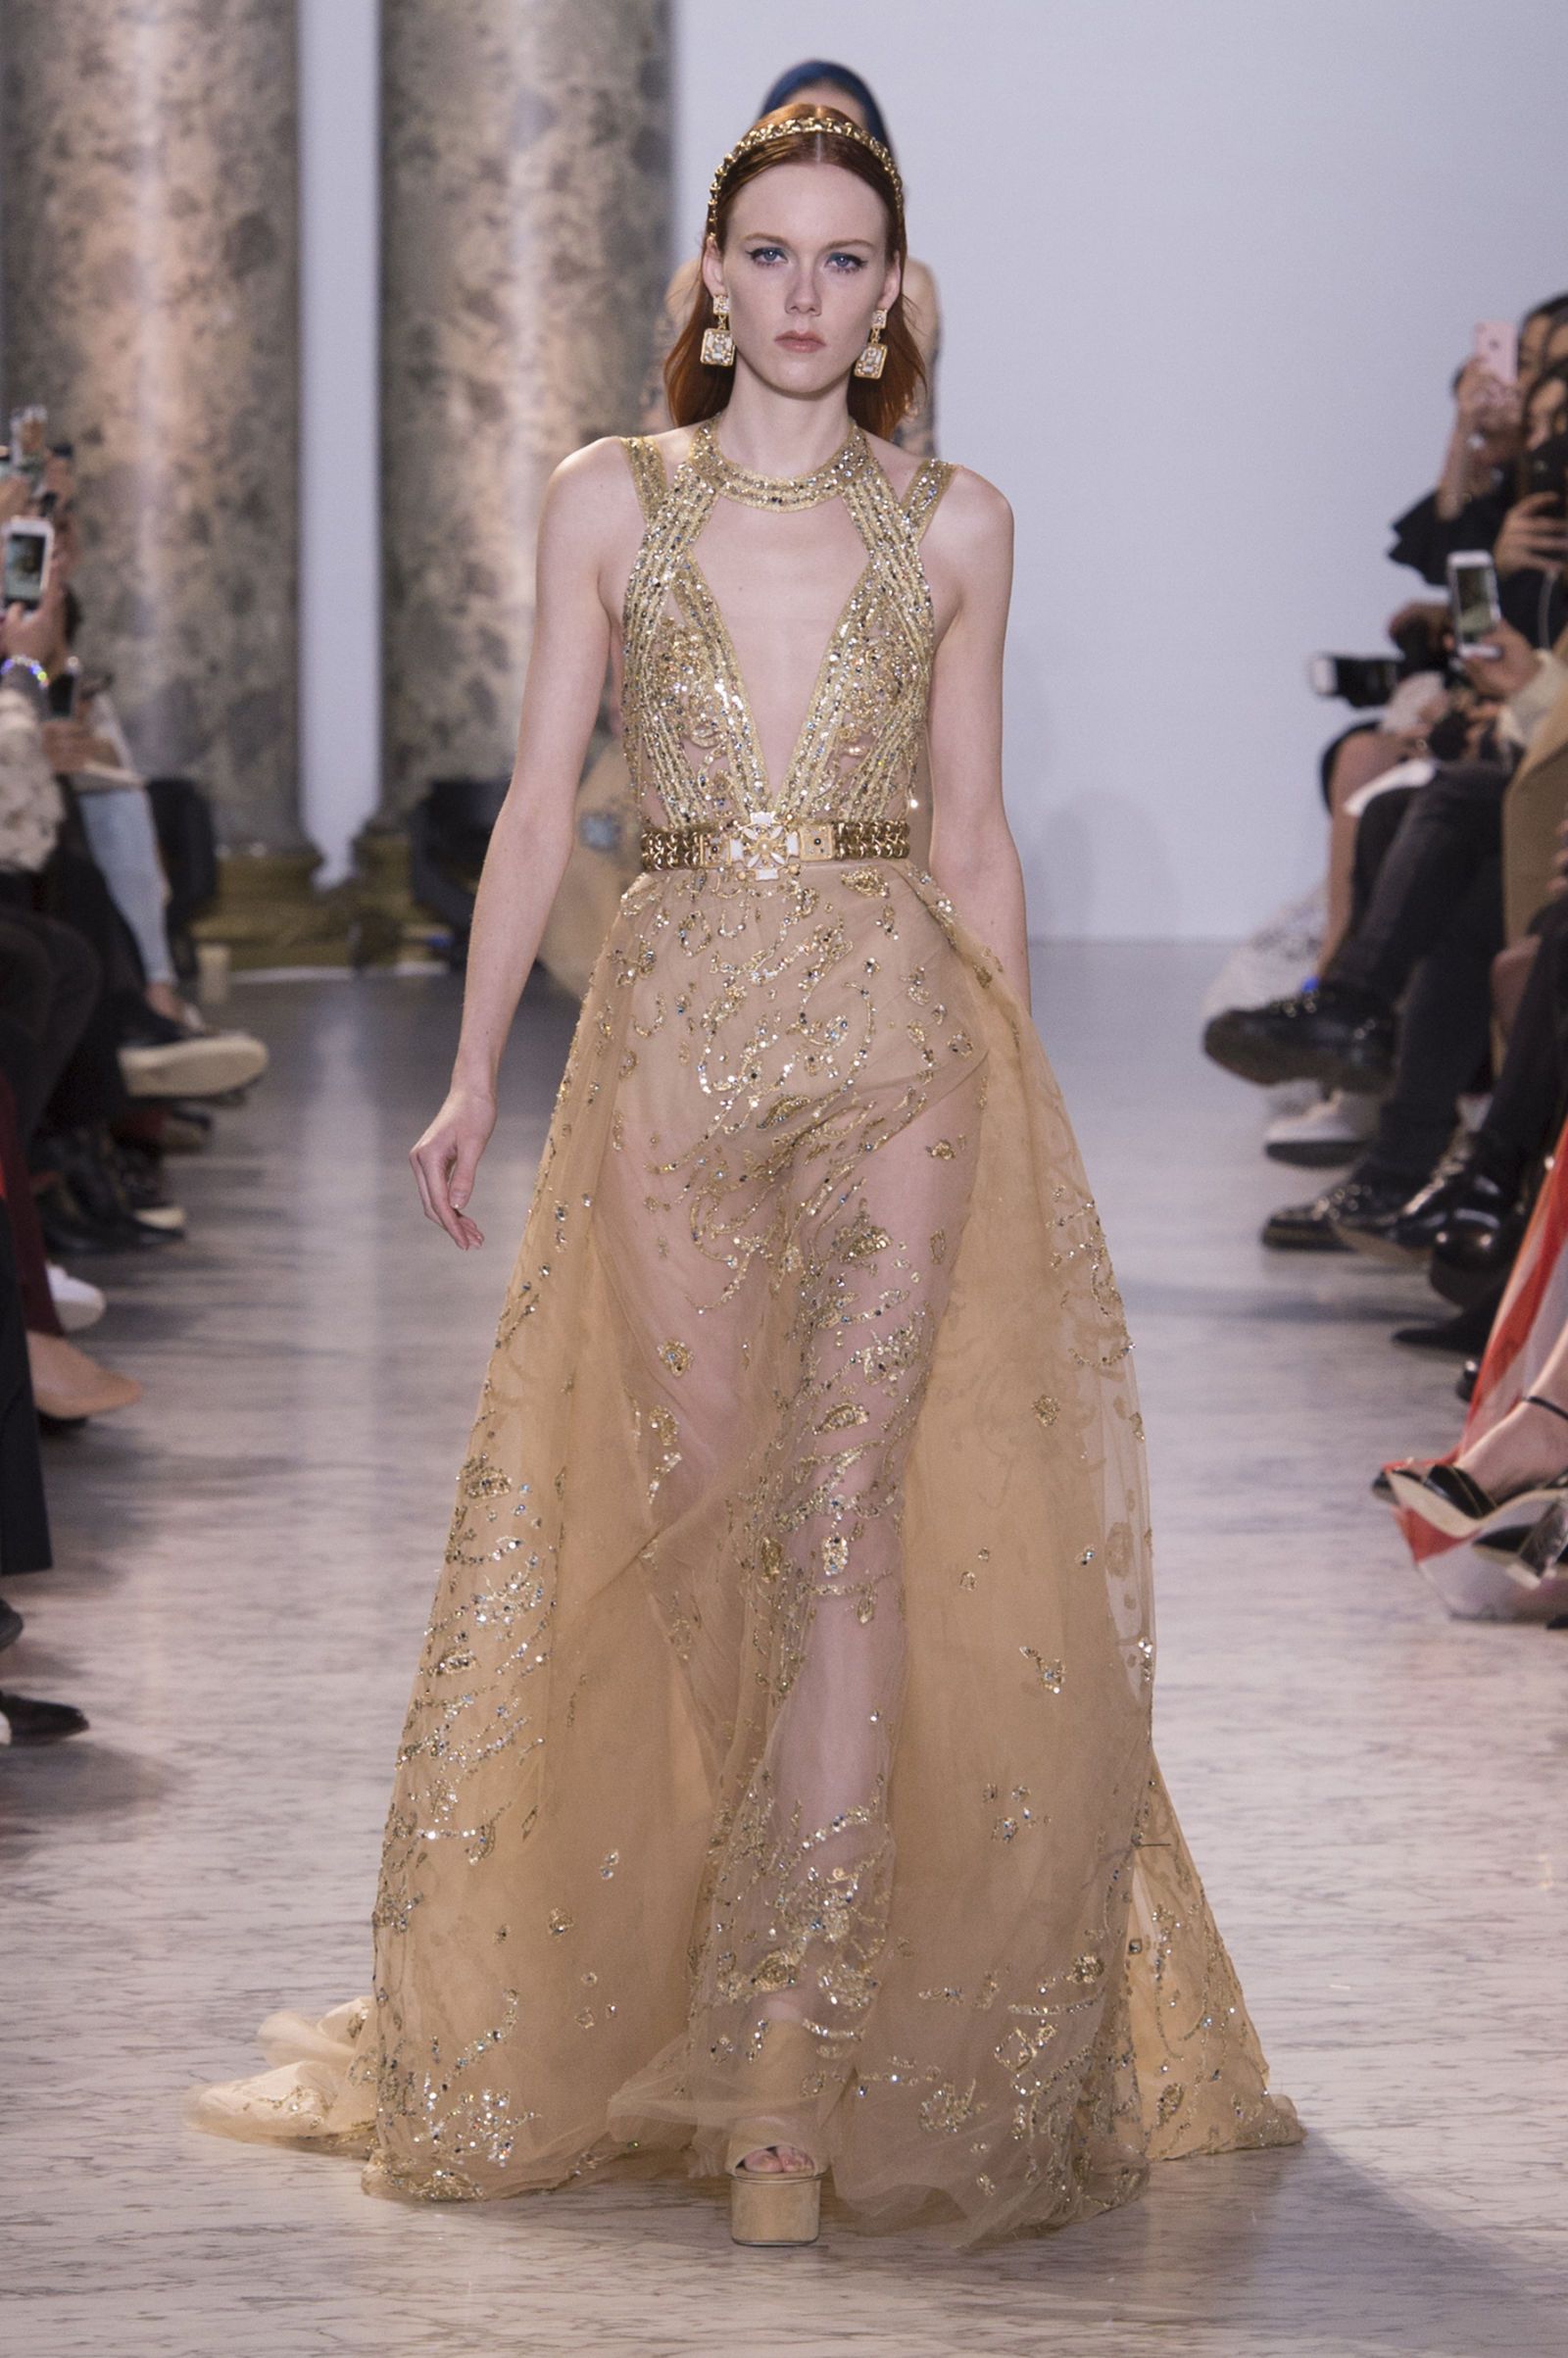 Taylor Swift in a gold sequin Elie Saab gown | Style Darling Daily